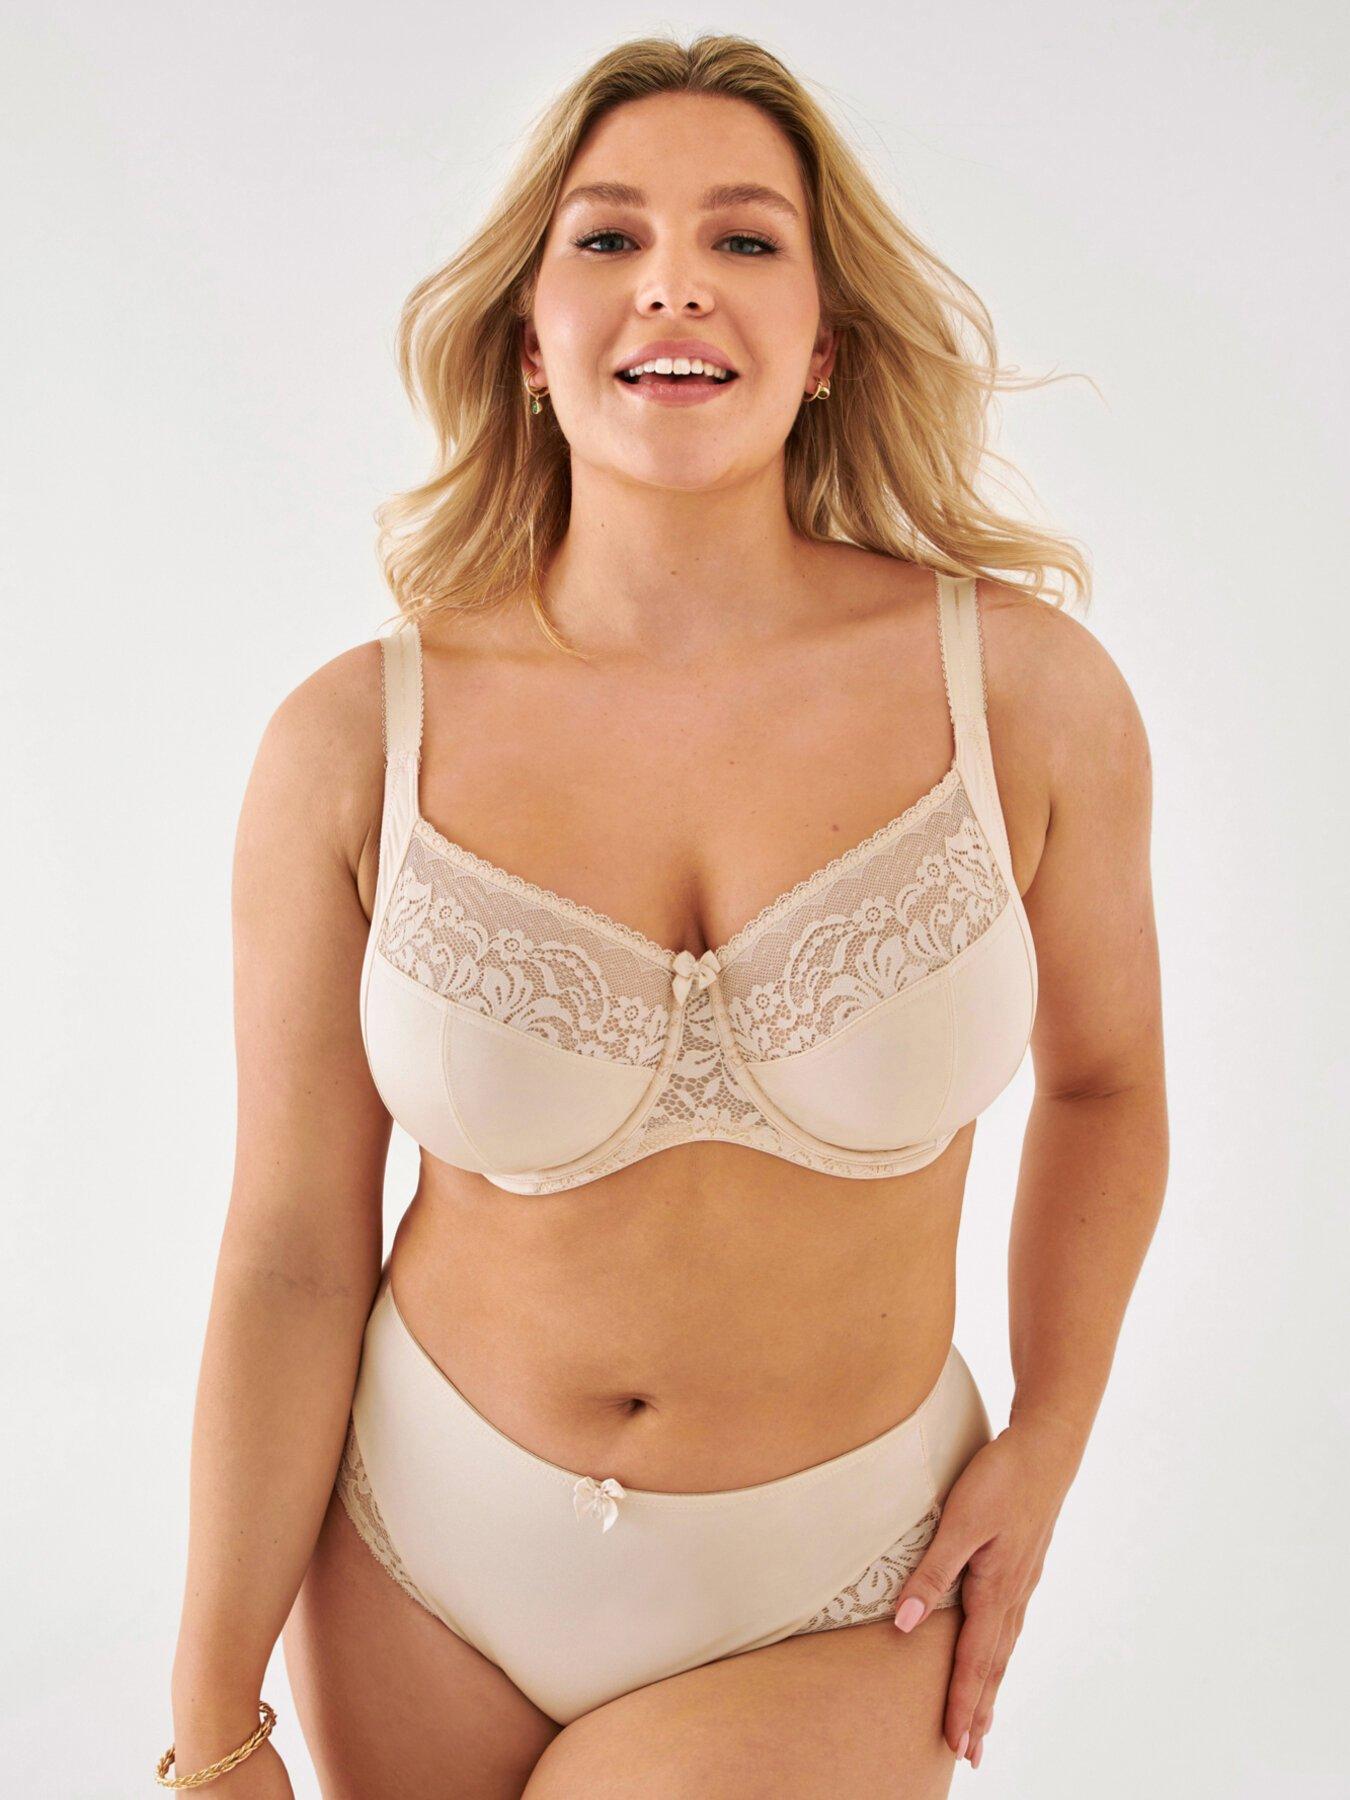 MARKS & SPENCER ‘BOUTIQUE’ WHITE/ORANGE EMB LACE FULL CUP BRA. SIZE 34F